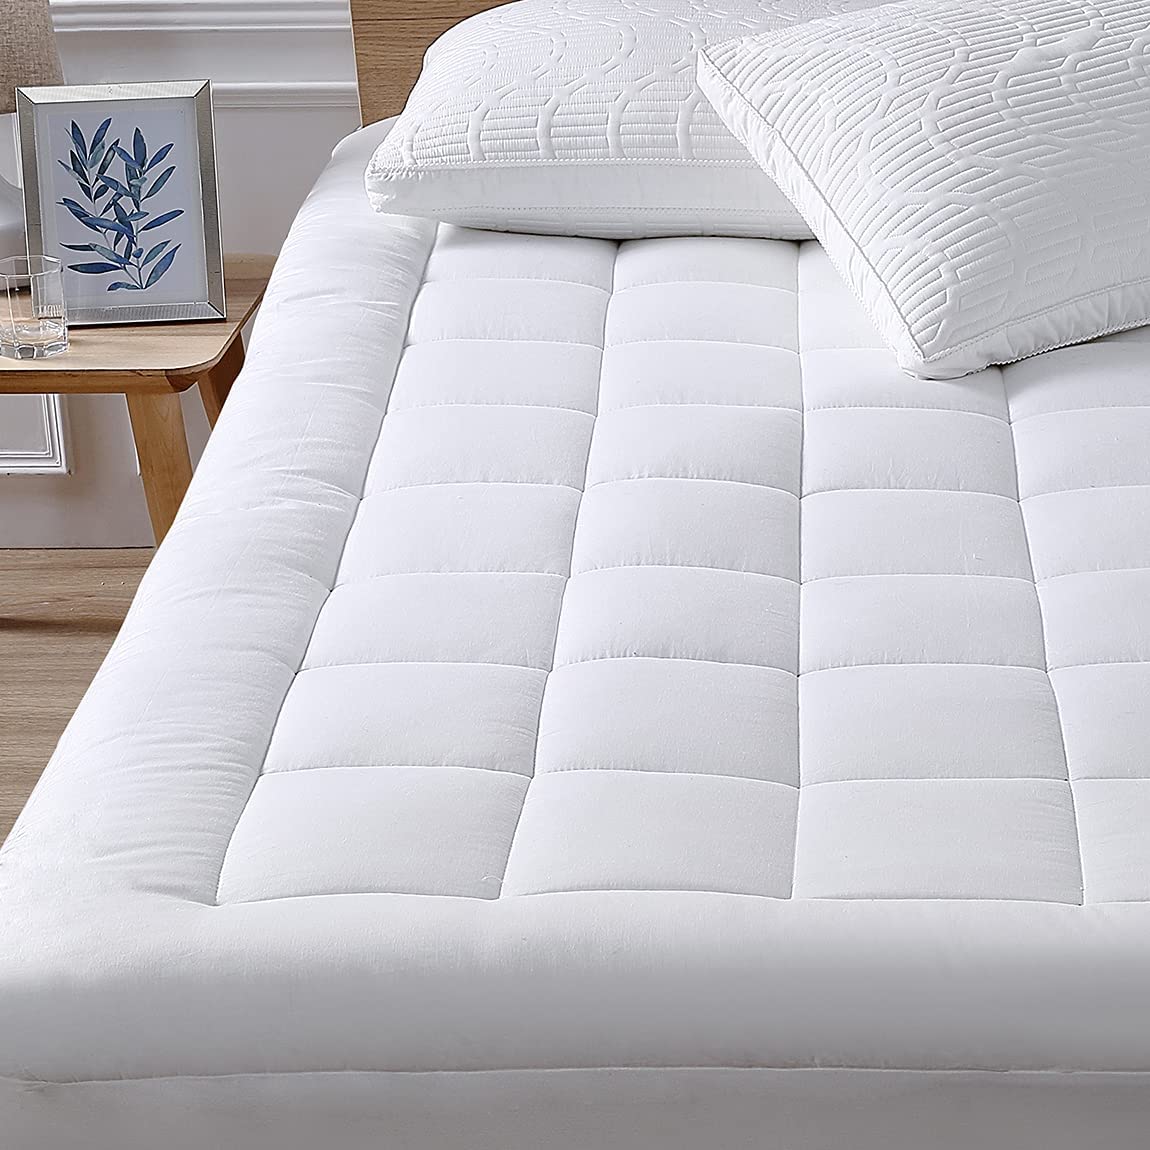  7. White Cooling Full Mattress Pad Cover with Stretches to 18-inch Deep Pocket by Oaskys 